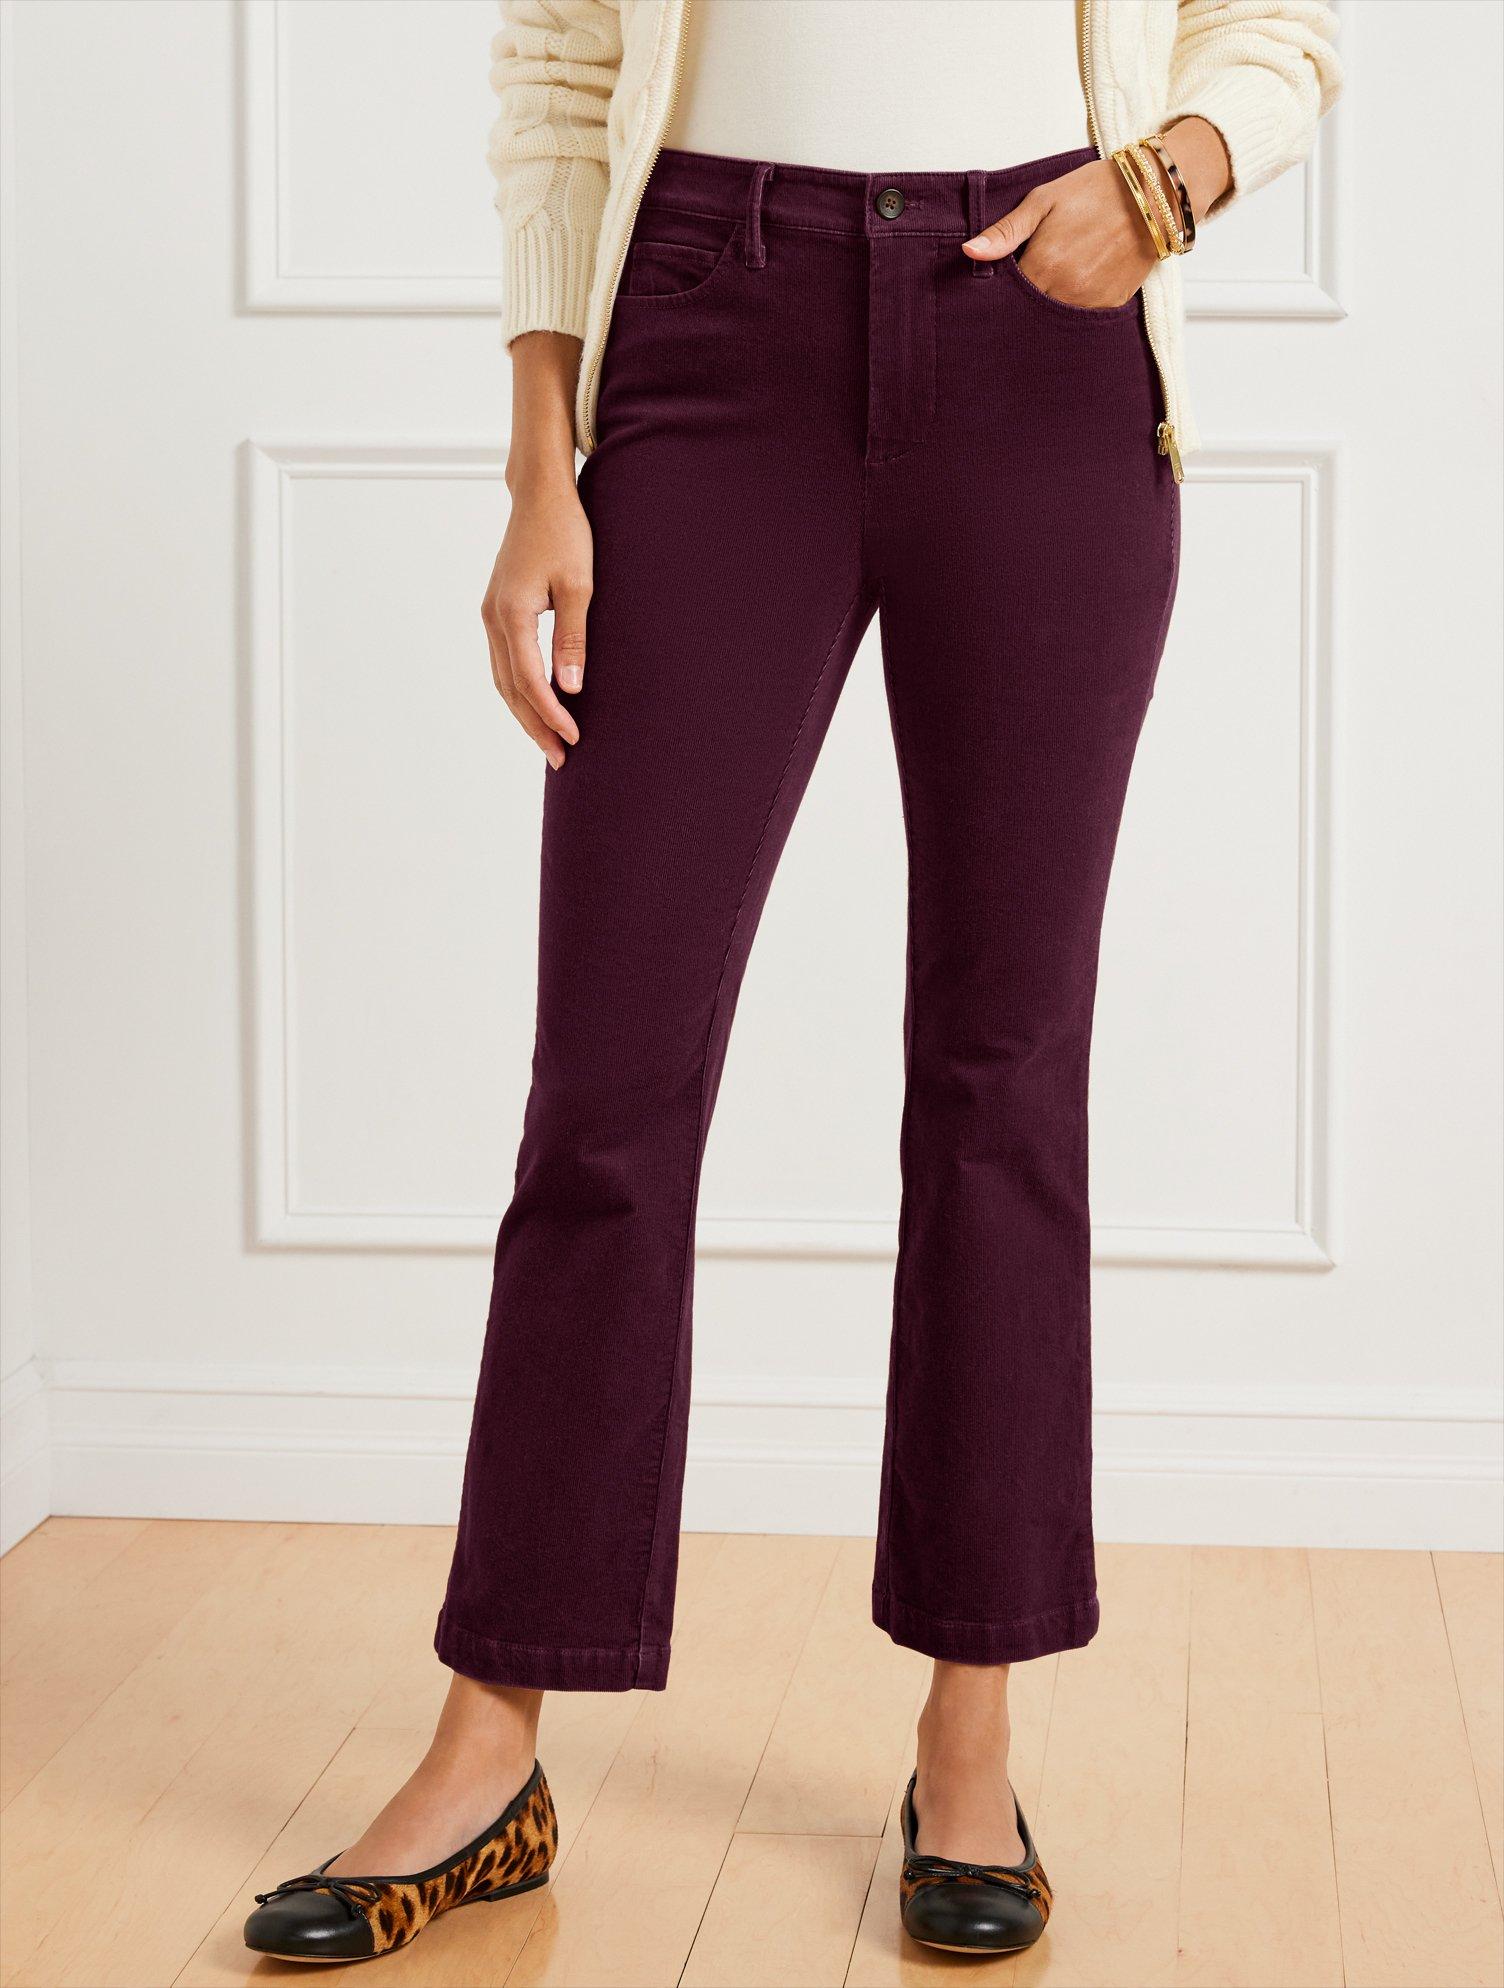 Talbots Stretch Corduroy Demi Boot Pants in Red